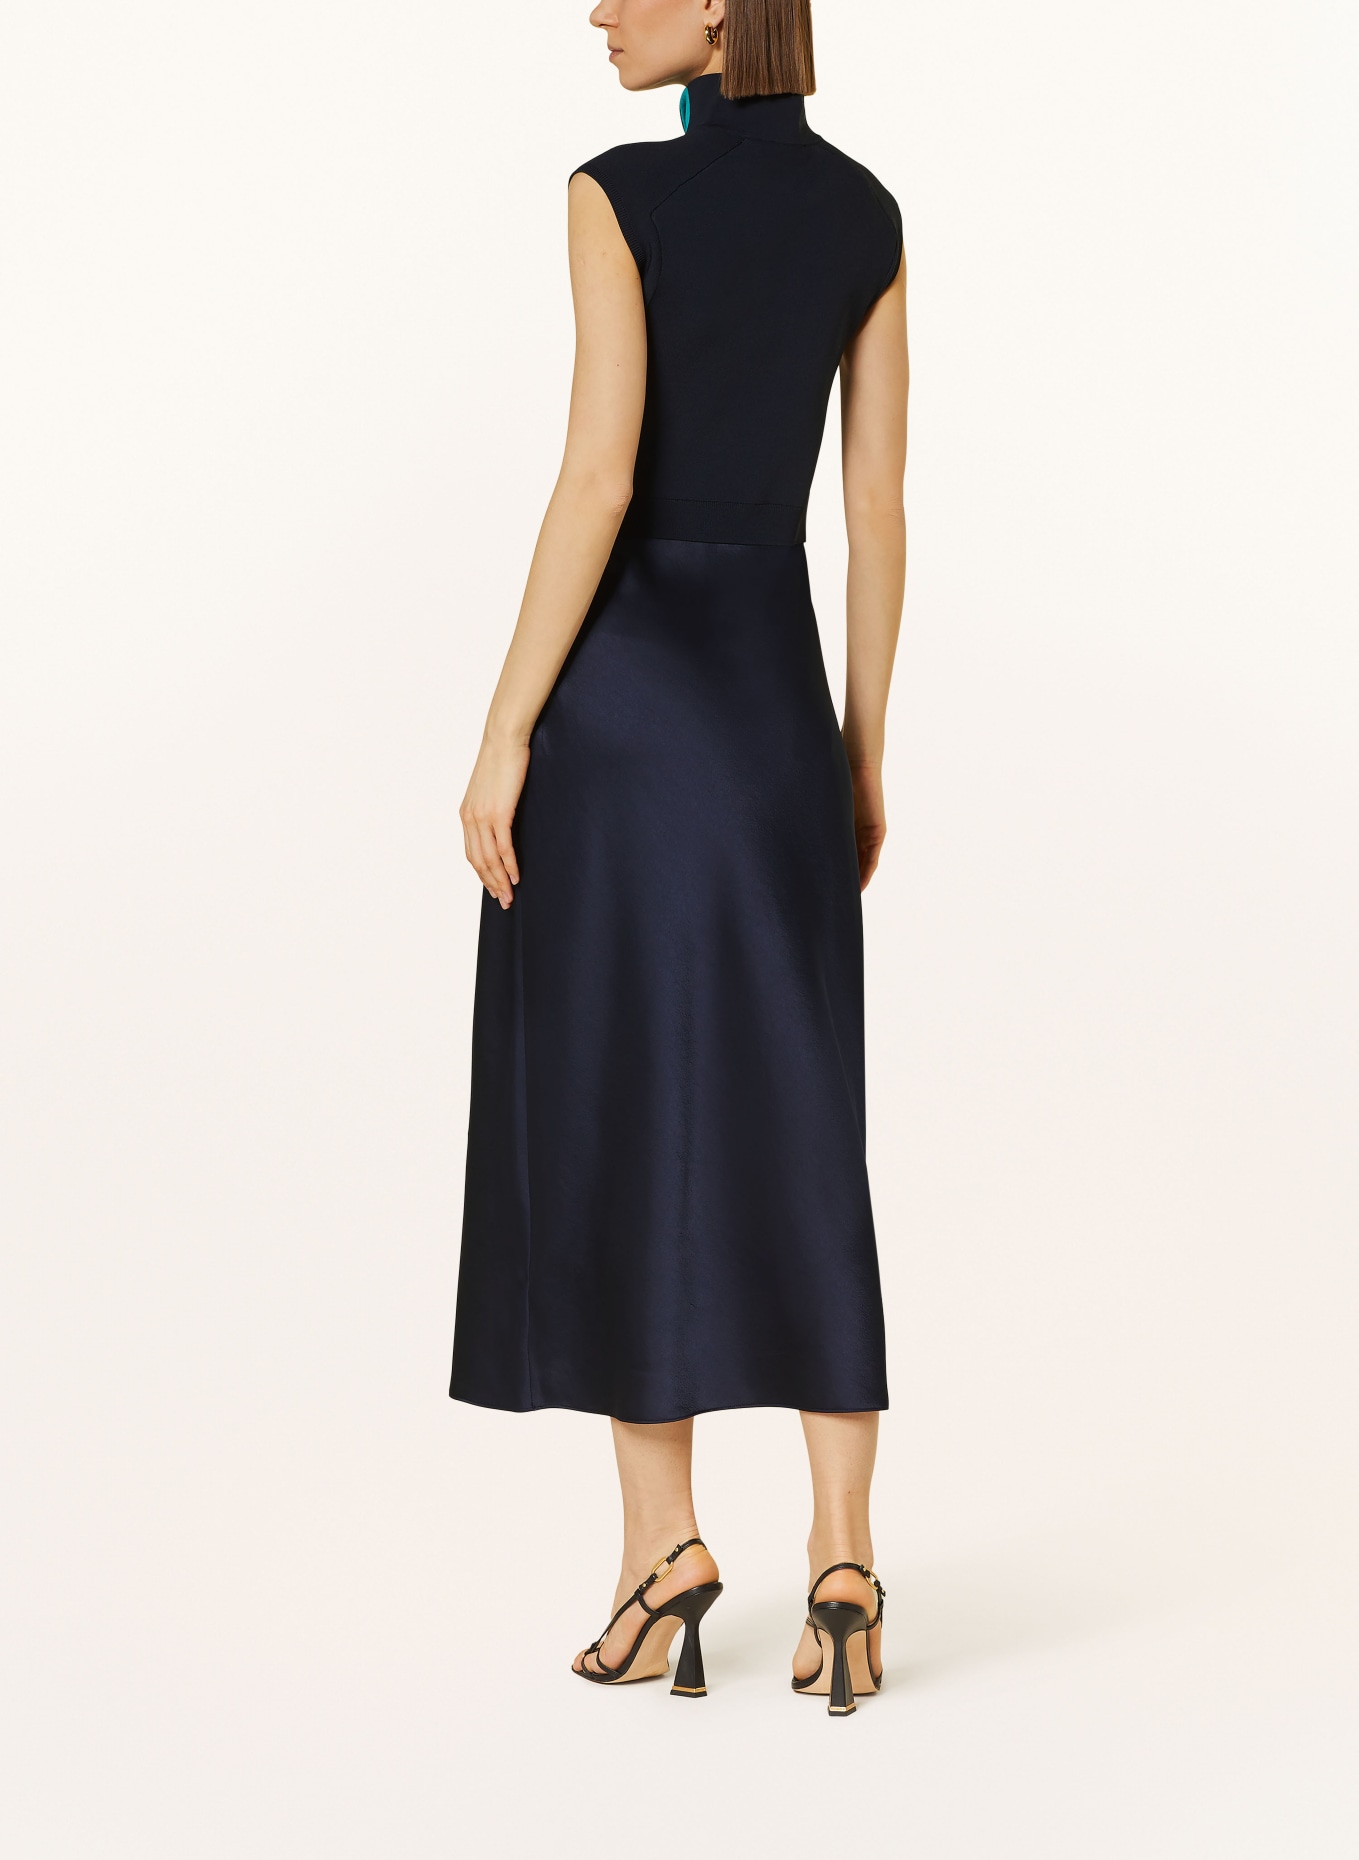 TED BAKER Dress PAOLLA in mixed materials with cut-out, Color: DARK BLUE (Image 3)